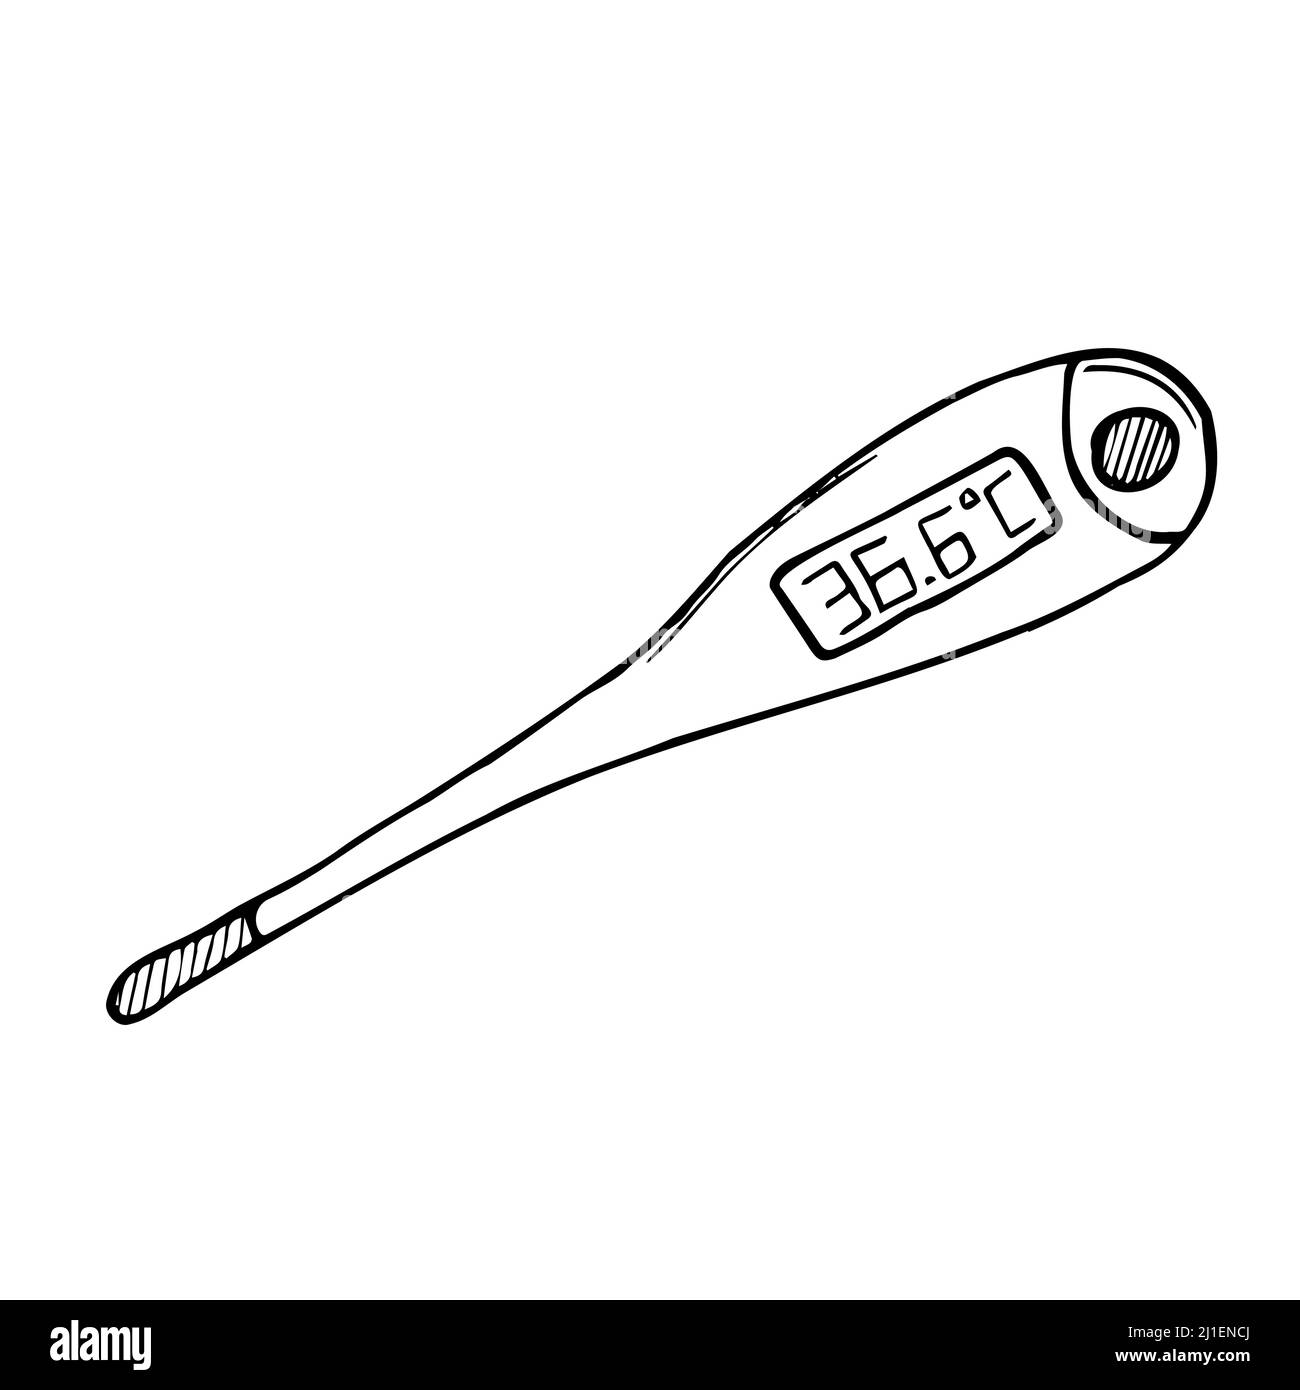 Medical thermometer hand drawn outline doodle icon. Digital medical tool for measuring and indicating body temperature. Vector sketch illustration for Stock Vector